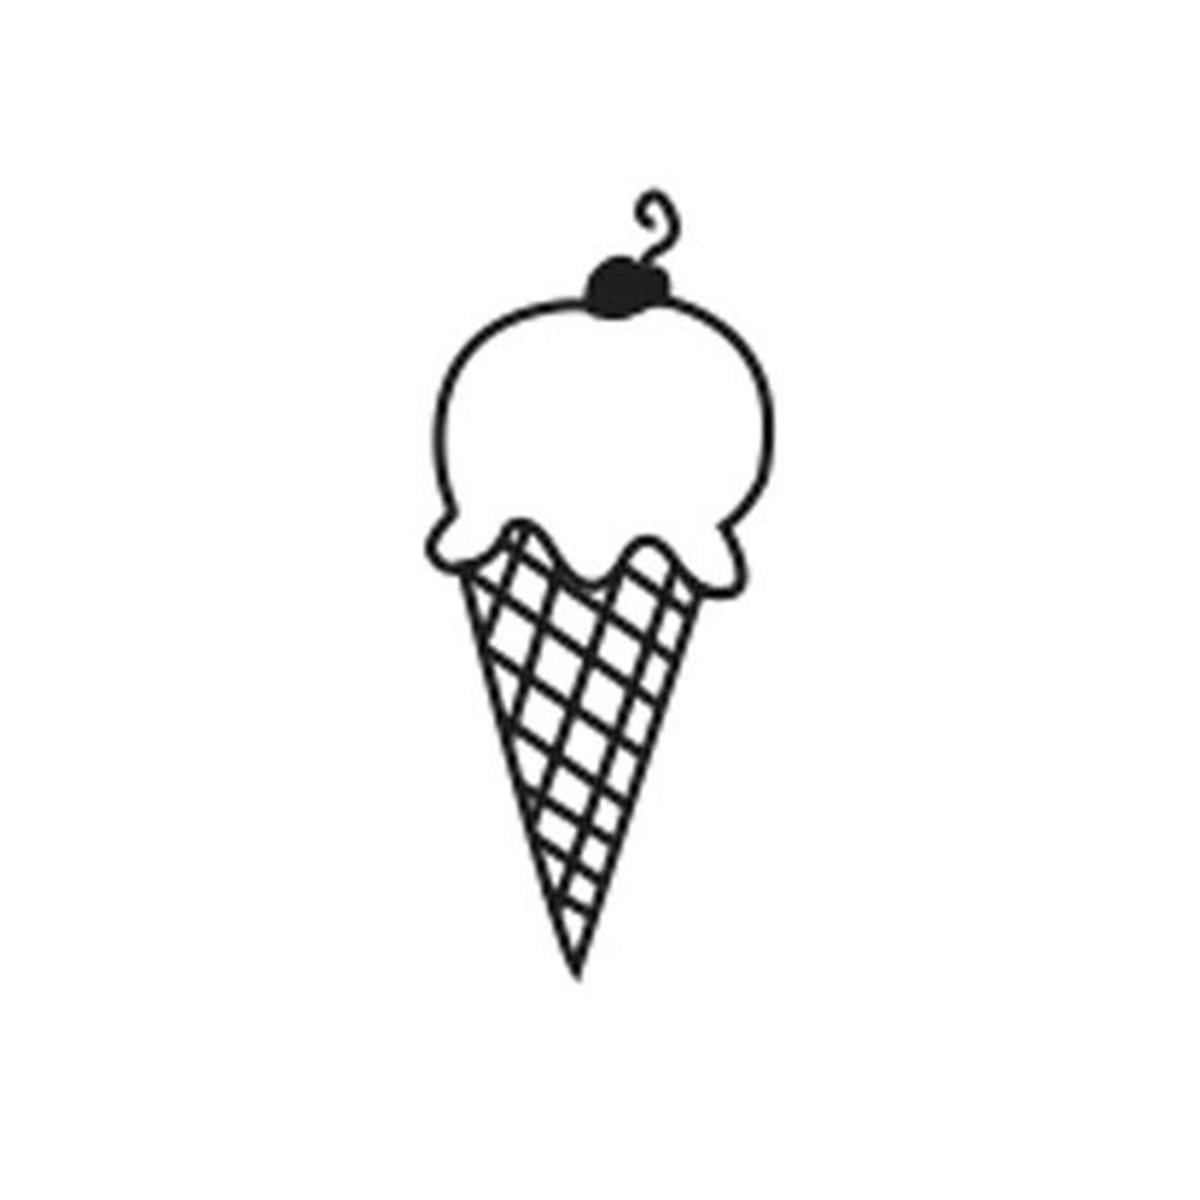 Picture of Creative Shapes Etc SE-0410 0.5 x 0.5 in. Incentive Stamp - Ice Cream Cone